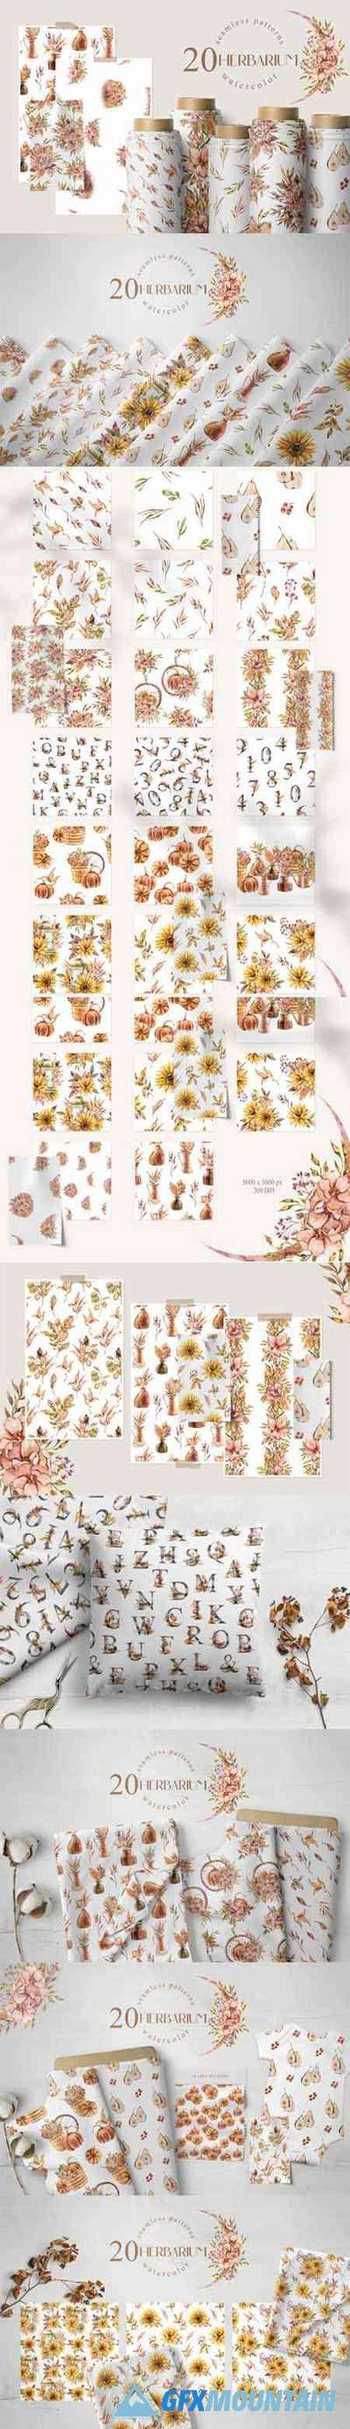 Watercolor Floral Seamless Patterns 8101116